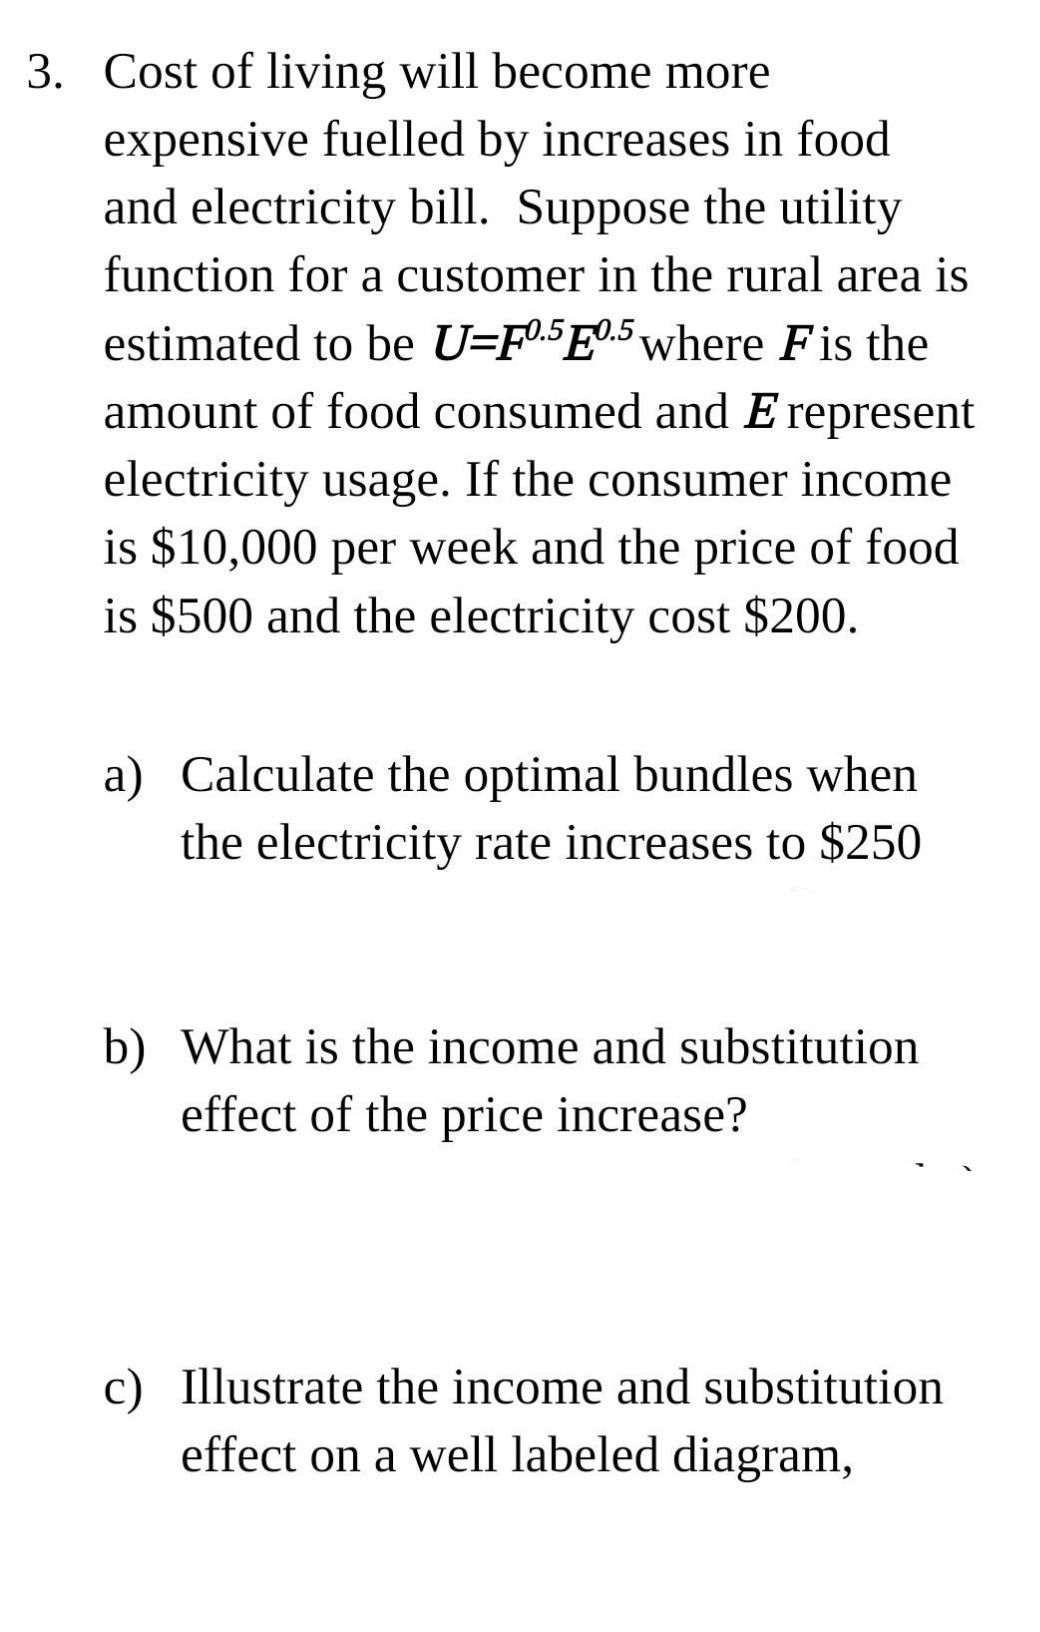 3. Cost of living will become more
expensive fuelled by increases in food
and electricity bill. Suppose the utility
function for a customer in the rural area is
estimated to be U=F05E0.5 where Fis the
amount of food consumed and E represent
electricity usage. If the consumer income
is $10,000 per week and the price of food
is $500 and the electricity cost $200.
a) Calculate the optimal bundles when
the electricity rate increases to $250
b) What is the income and substitution
effect of the price increase?
c) Illustrate the income and substitution
effect on a well labeled diagram,
